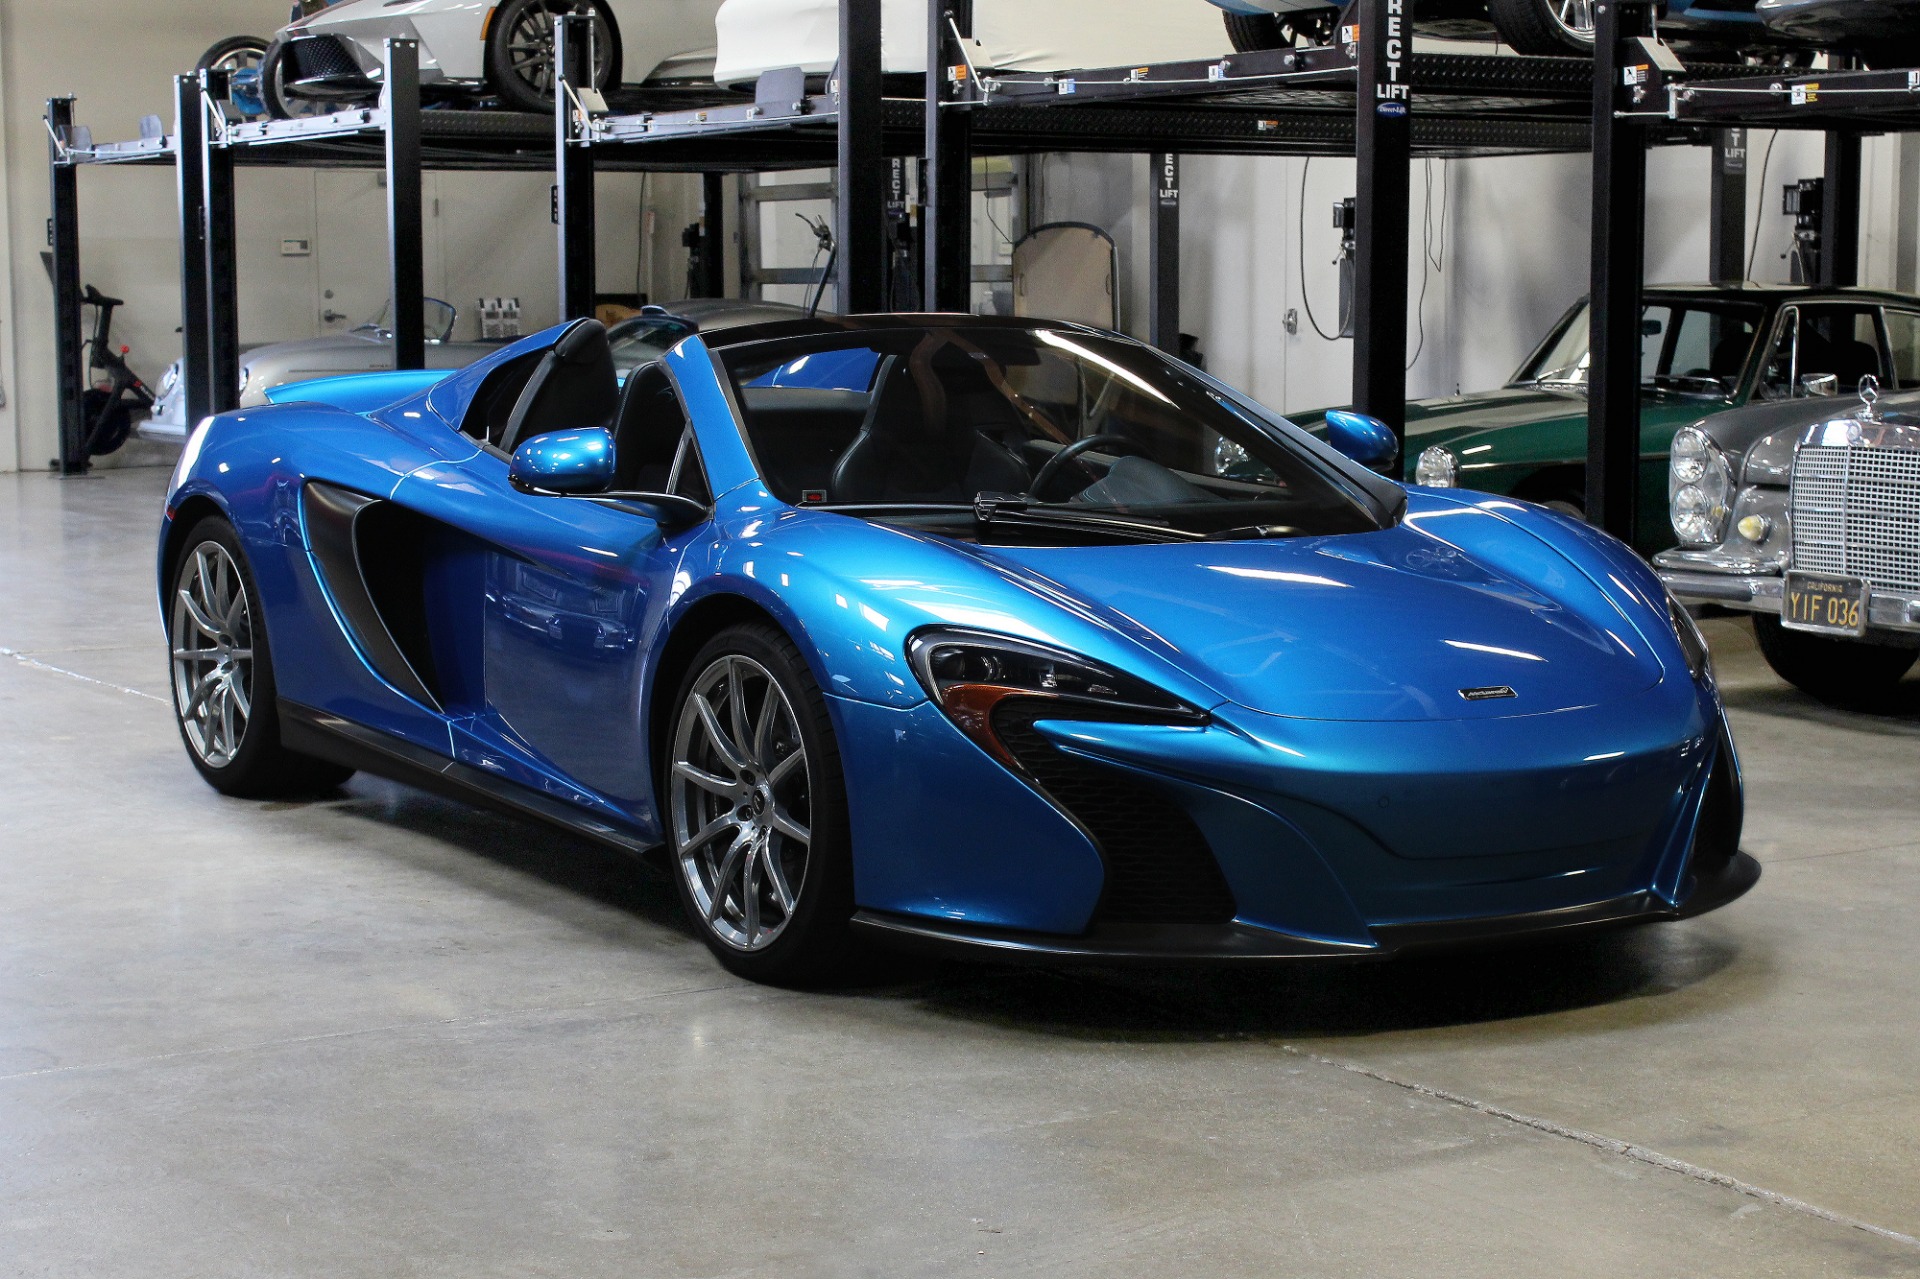 Used 2015 McLaren 650S Spider for sale $205,995 at San Francisco Sports Cars in San Carlos CA 94070 1